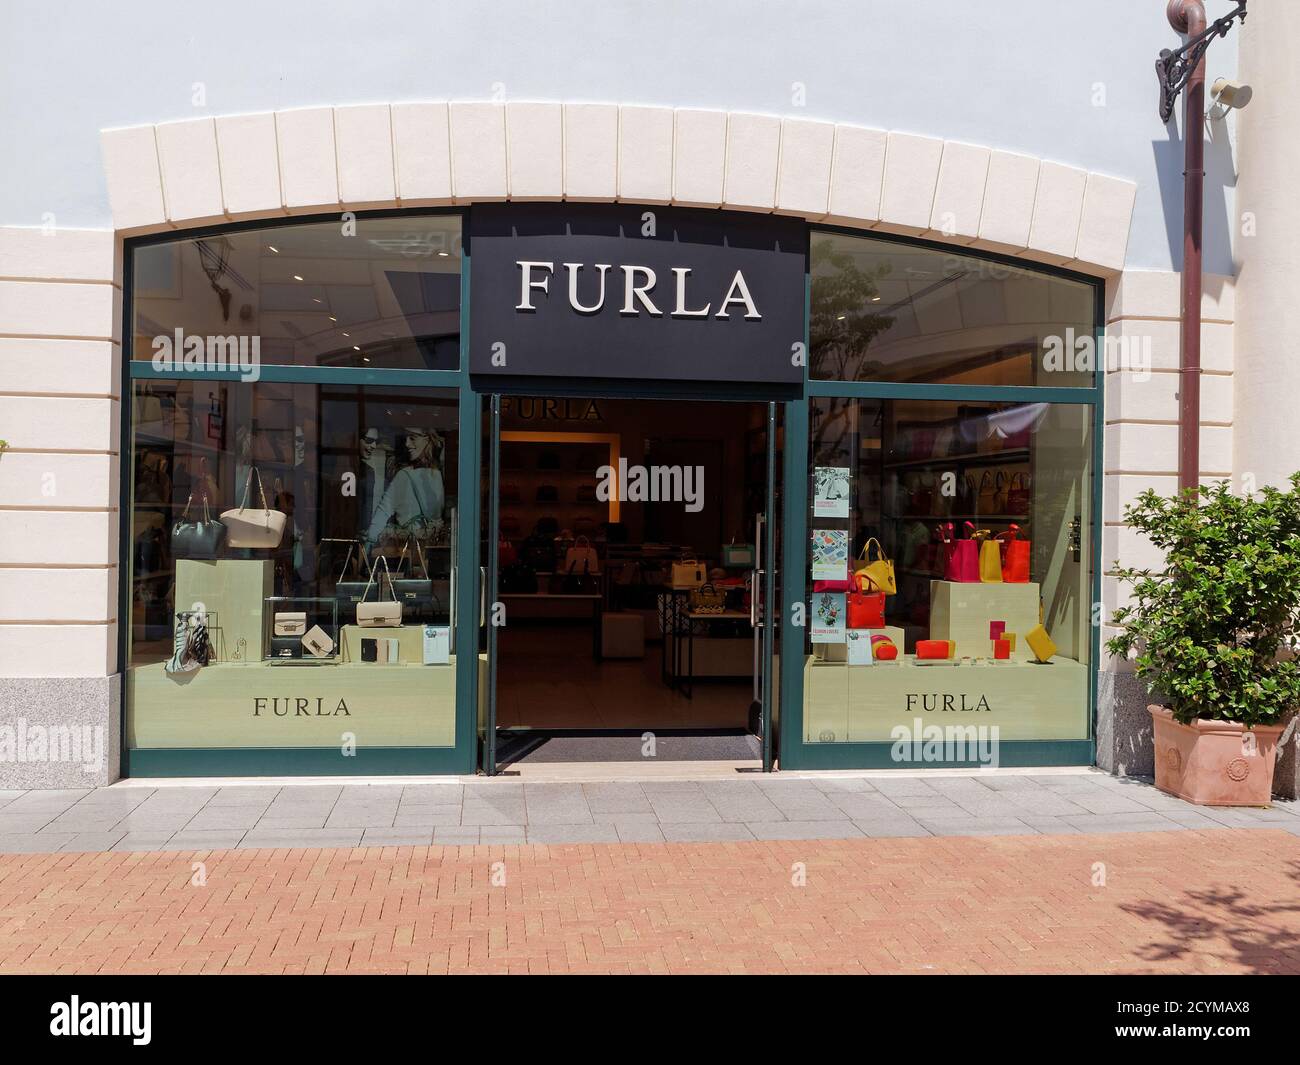 ROME, ITALY - JULY 25, 2015. Furla Store in Rome, Italy. Furla features Italian designed products that range from handbags and shoes to accessories Stock Photo